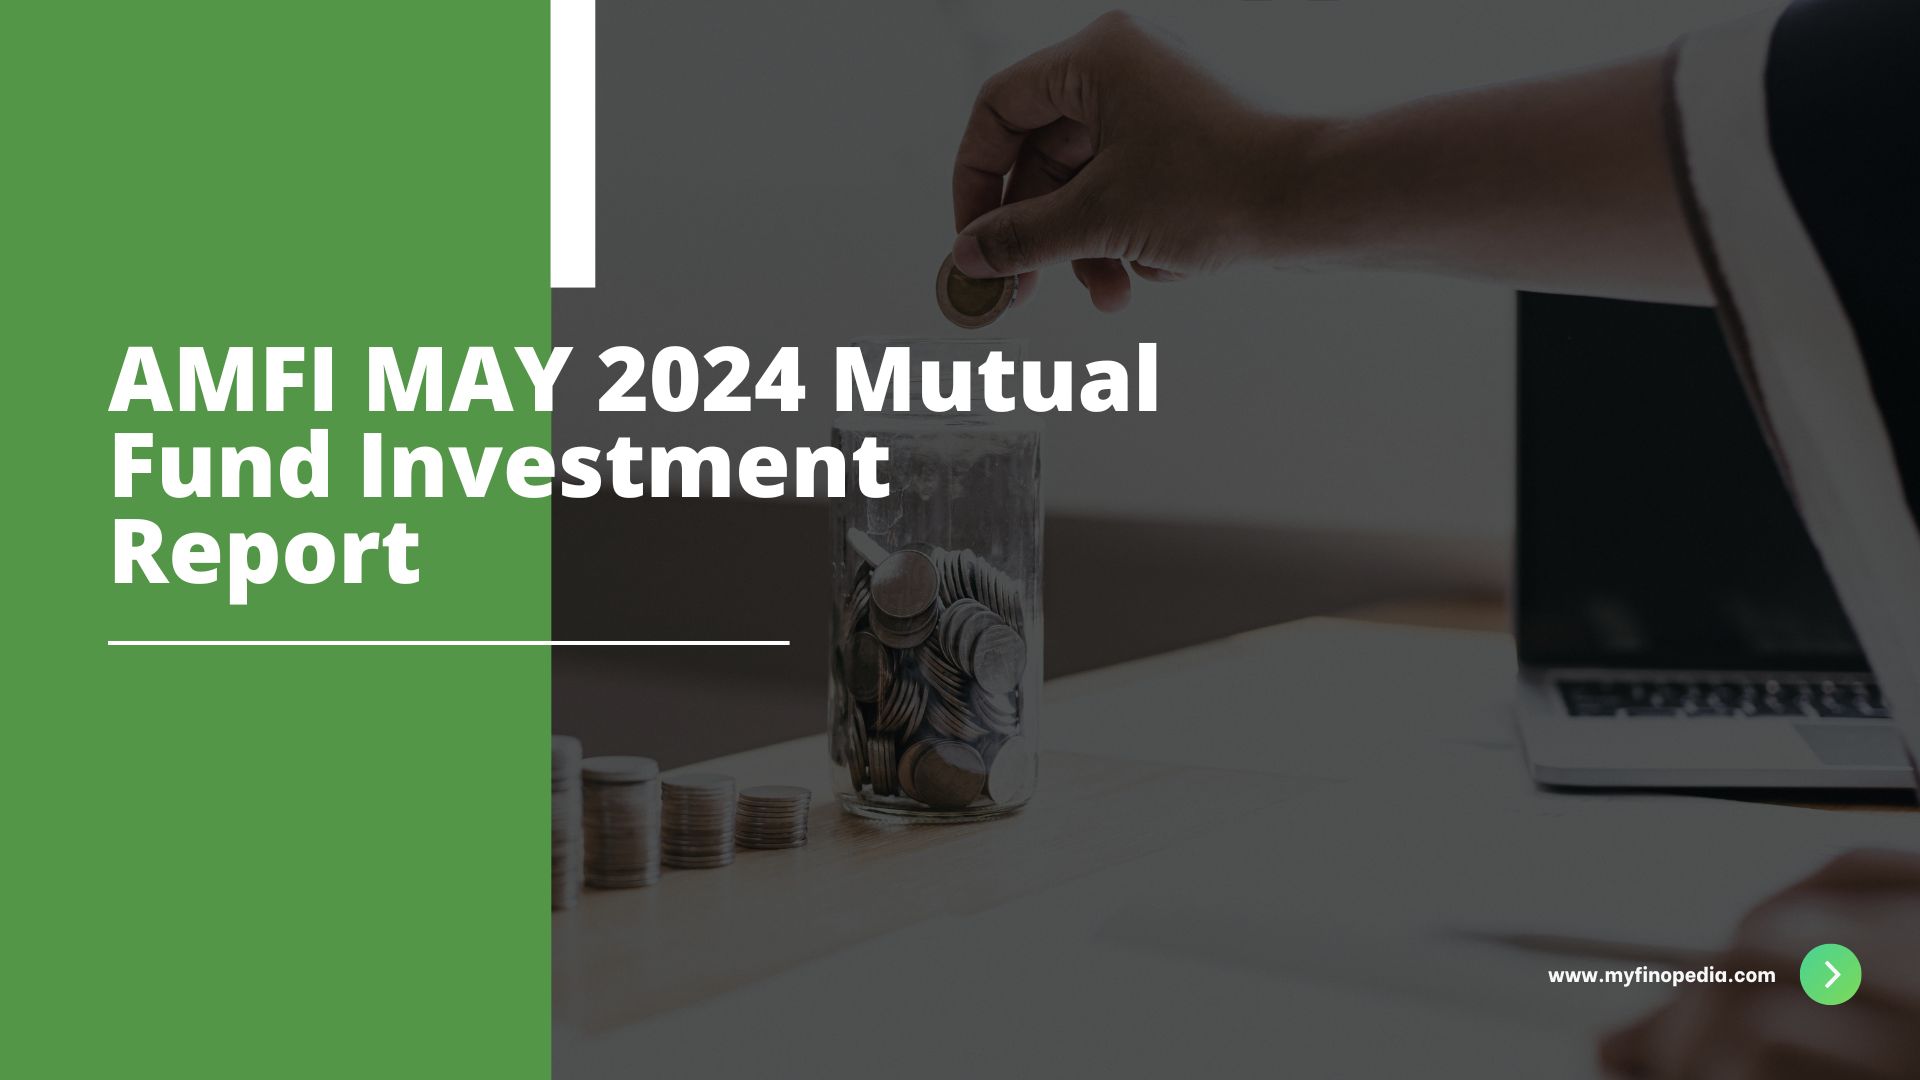 AMFI MAY 2024 Mutual Fund Investment Report